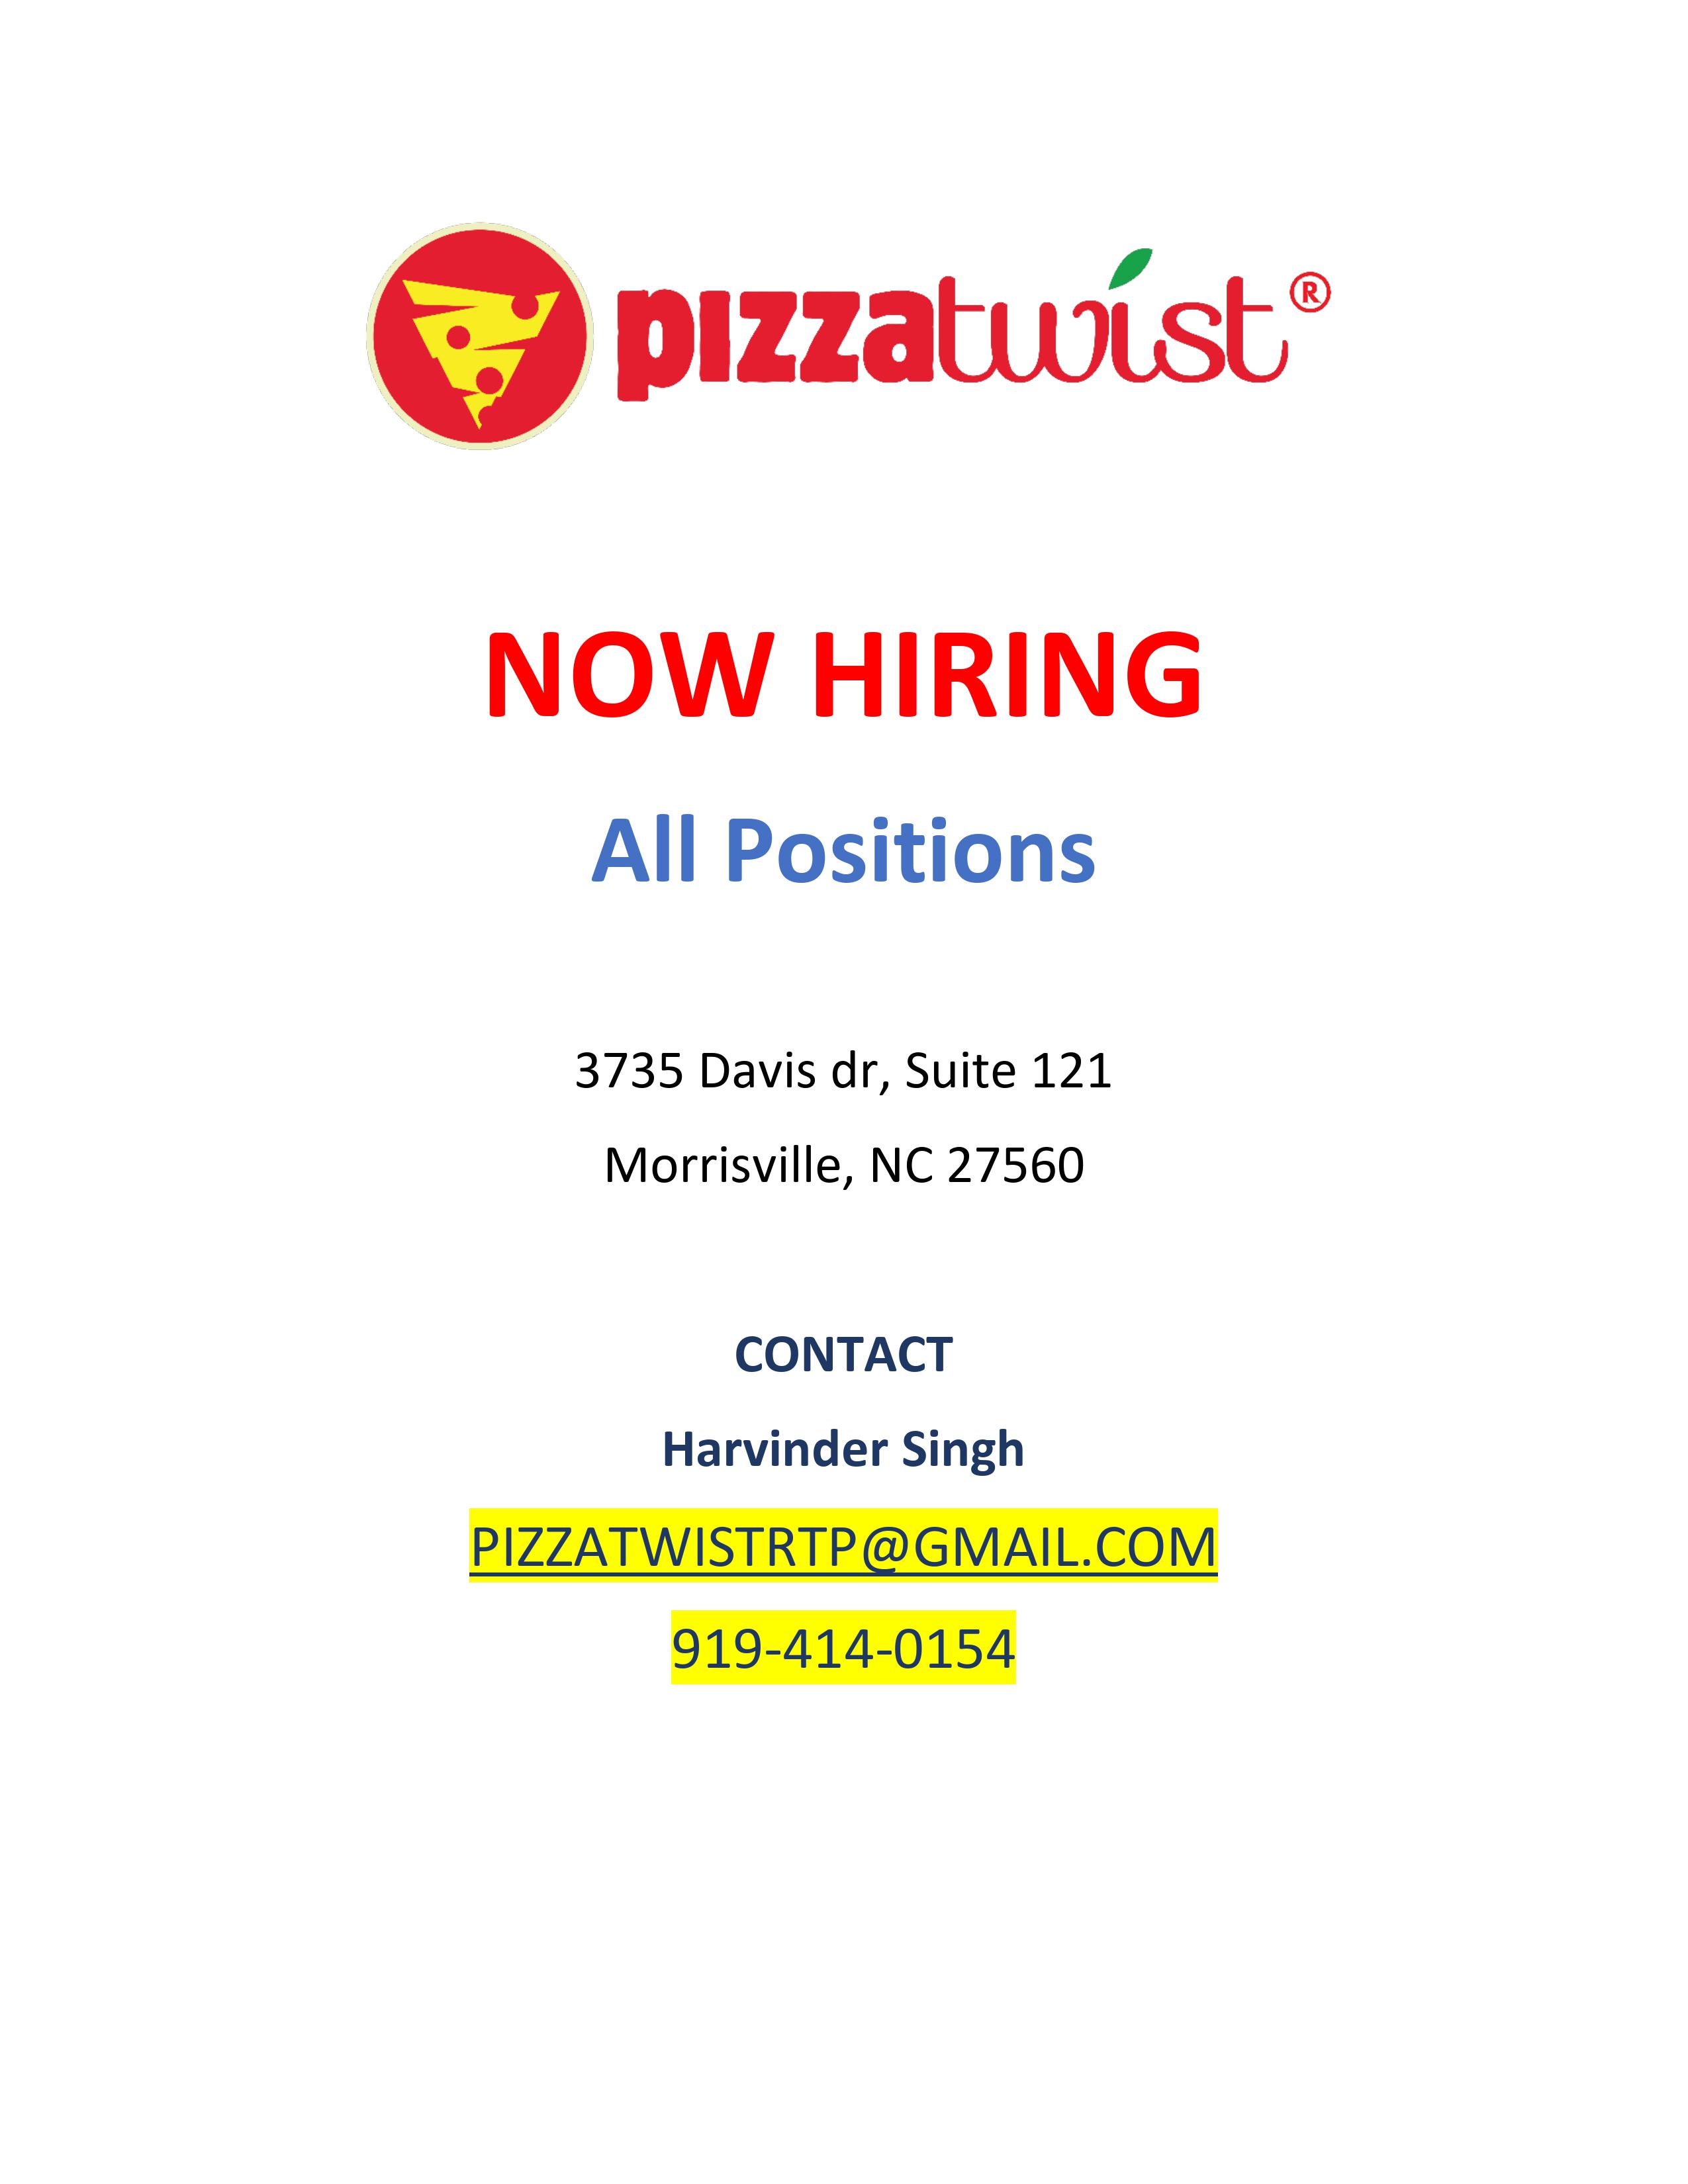 Pizza Twist at Morrisville is hiring for all open positions